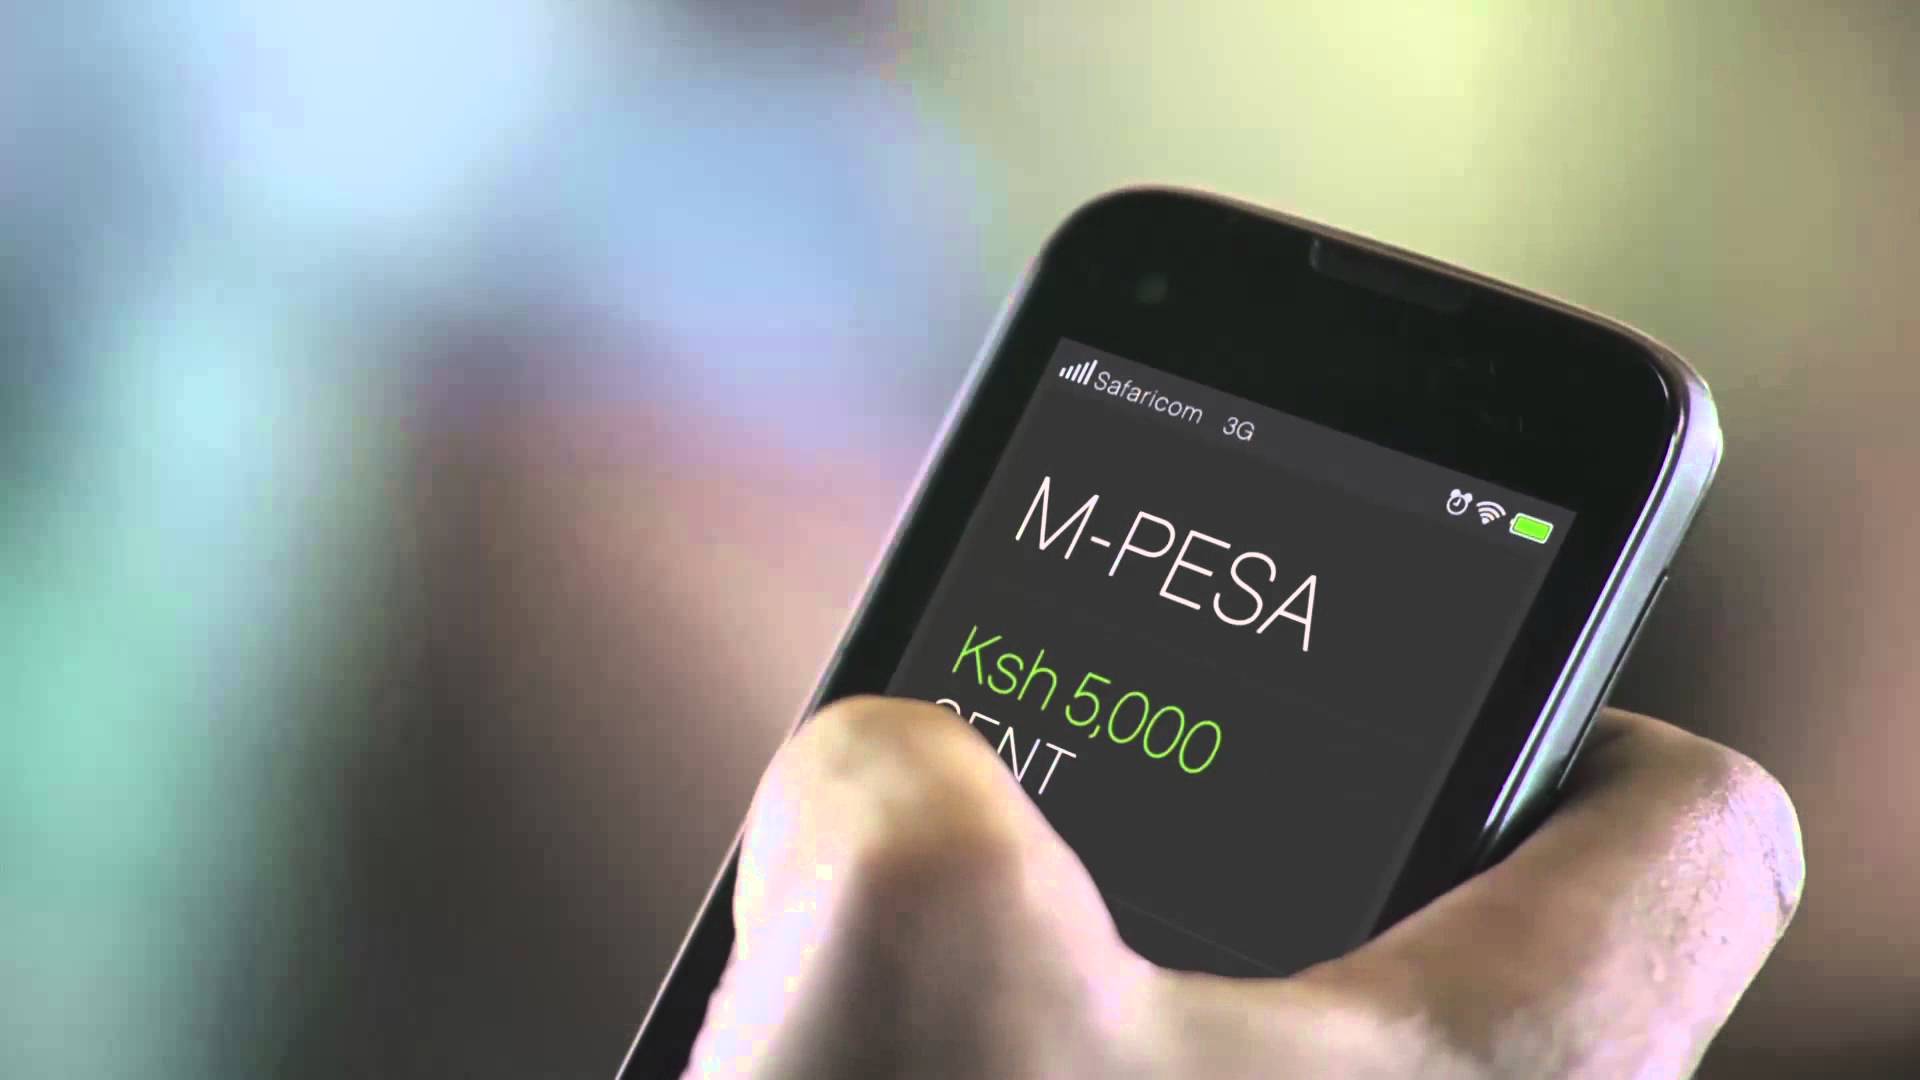 How to Get Mpesa Transaction Code - wide 4